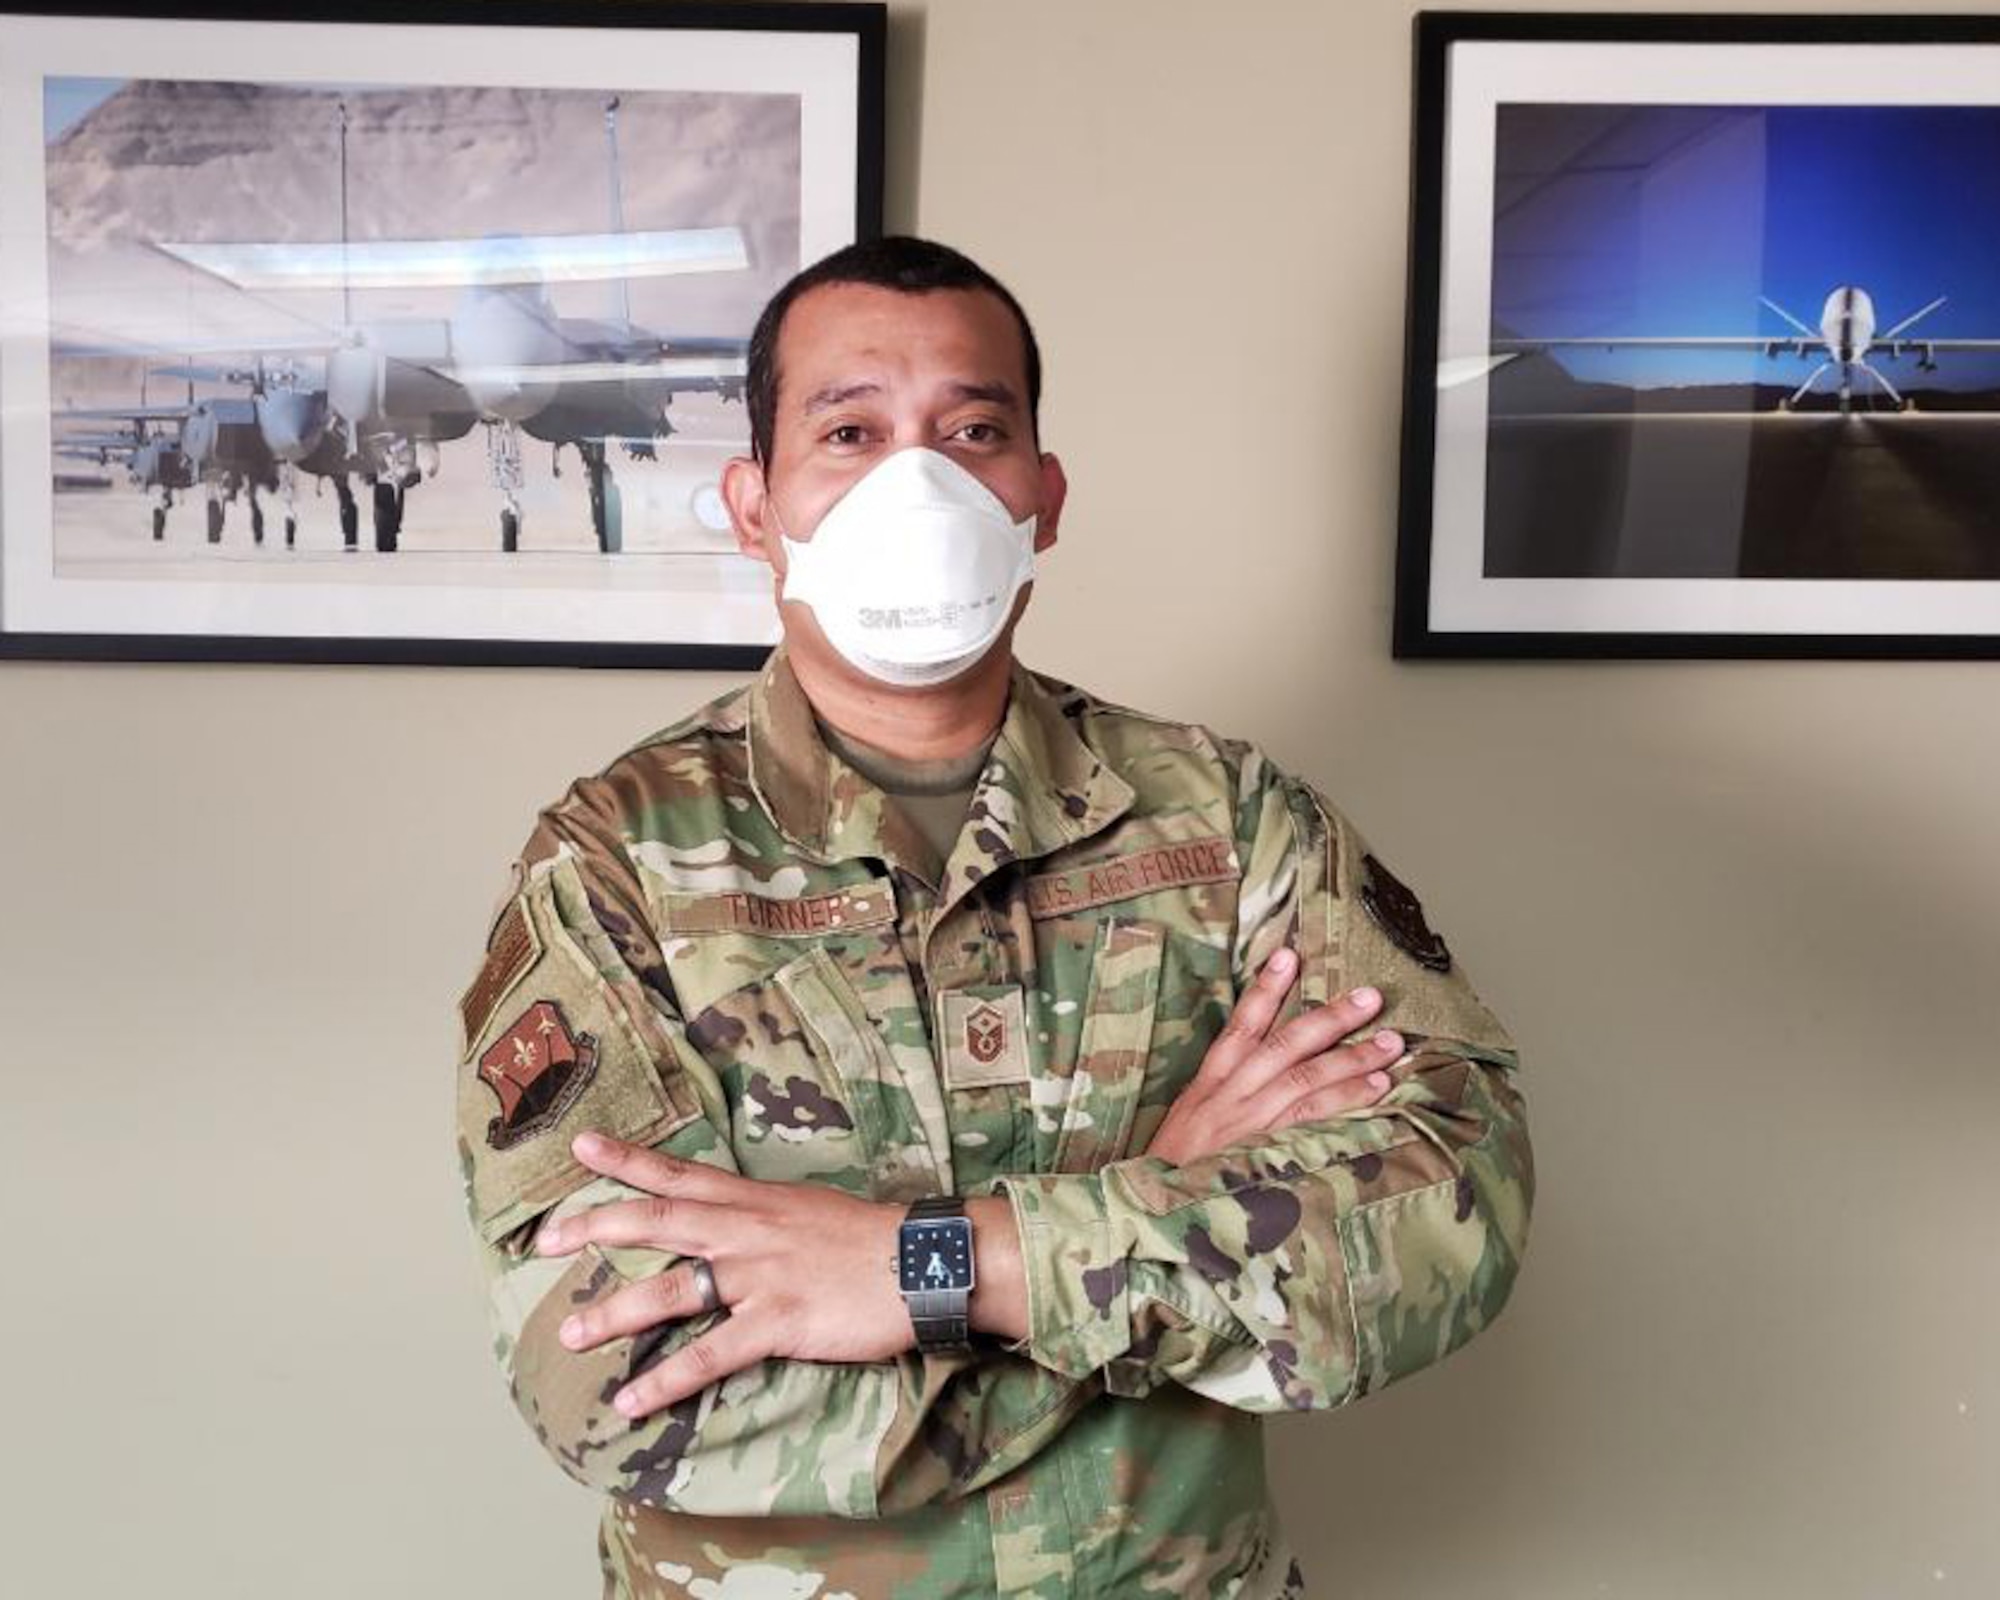 Master Sgt. Alexander Turner, 706th Fighter Squadron first sergeant, Nellis Air Force Base, Nevada, May 2, 2020. Turner has been working non-stop to ensure his Airmen are taken care of with food security, financial readiness and resiliency during the COVID-19 pandemic.